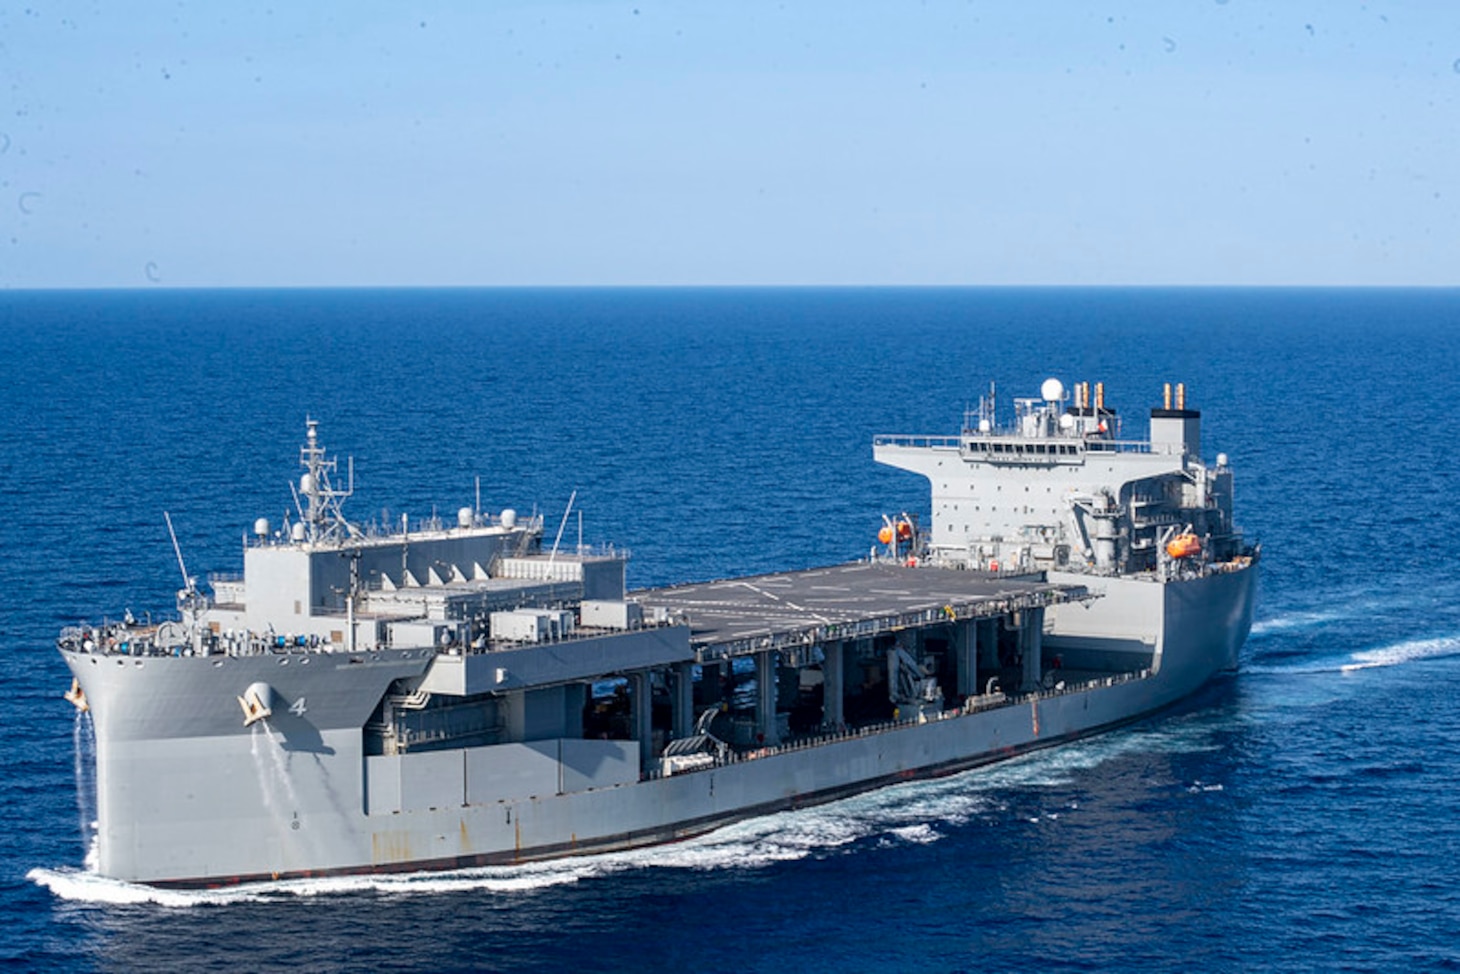 The expeditionary sea base USS Hershel "Woody" Williams (ESB 4) participates in a photo exercise in the Mediterranean Sea, Aug. 20, 2020.